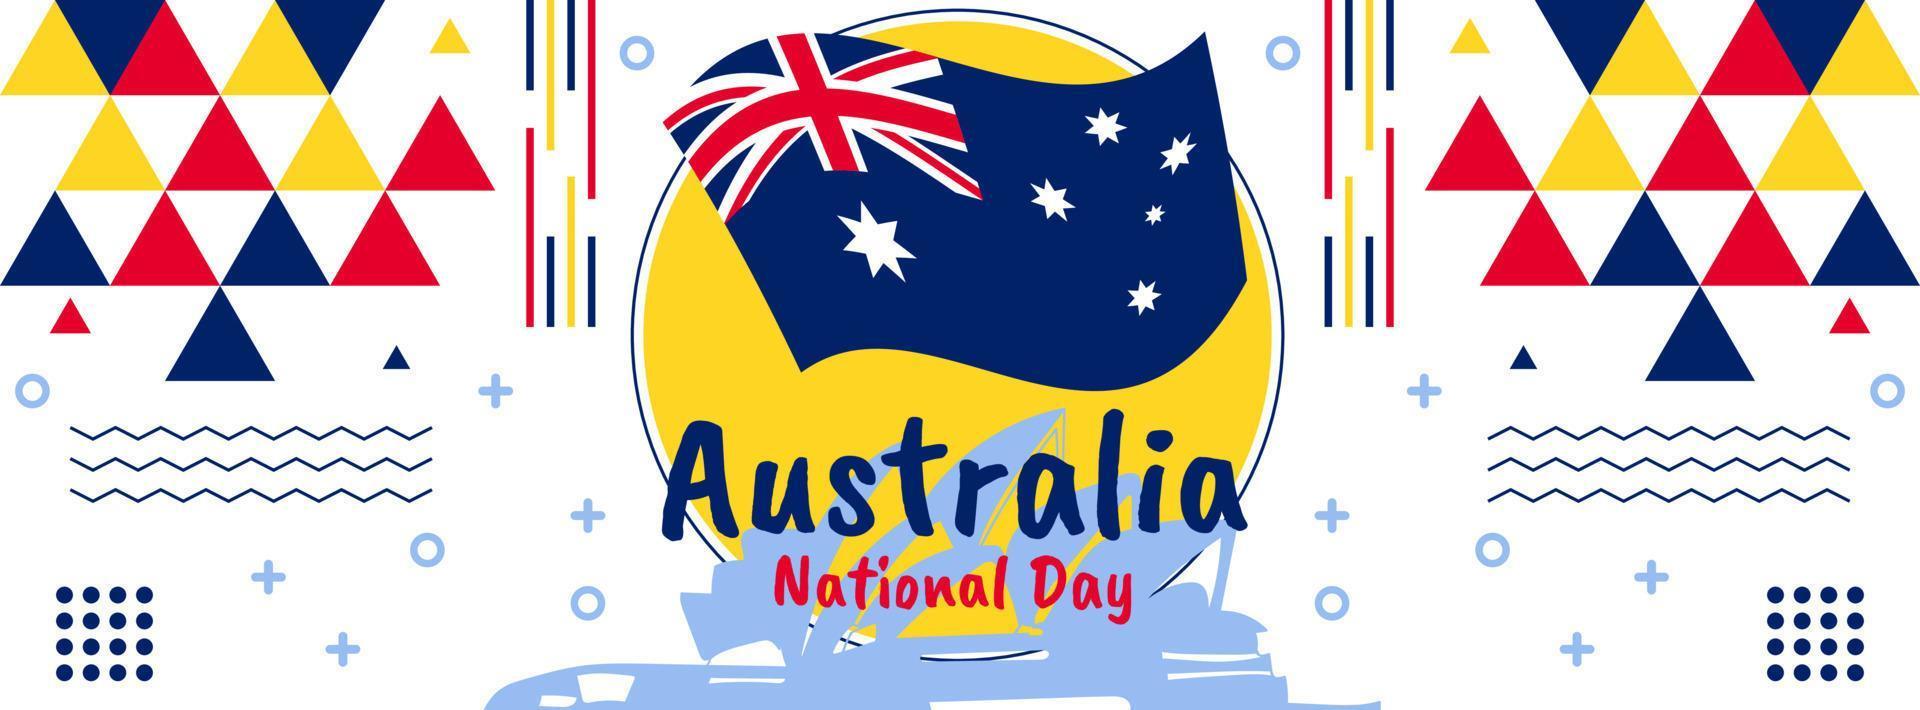 Australia day banner design for 26th of January. Abstract geometric banner for the national day of Australia. Australian flag theme with Sydney landmarks background. vector